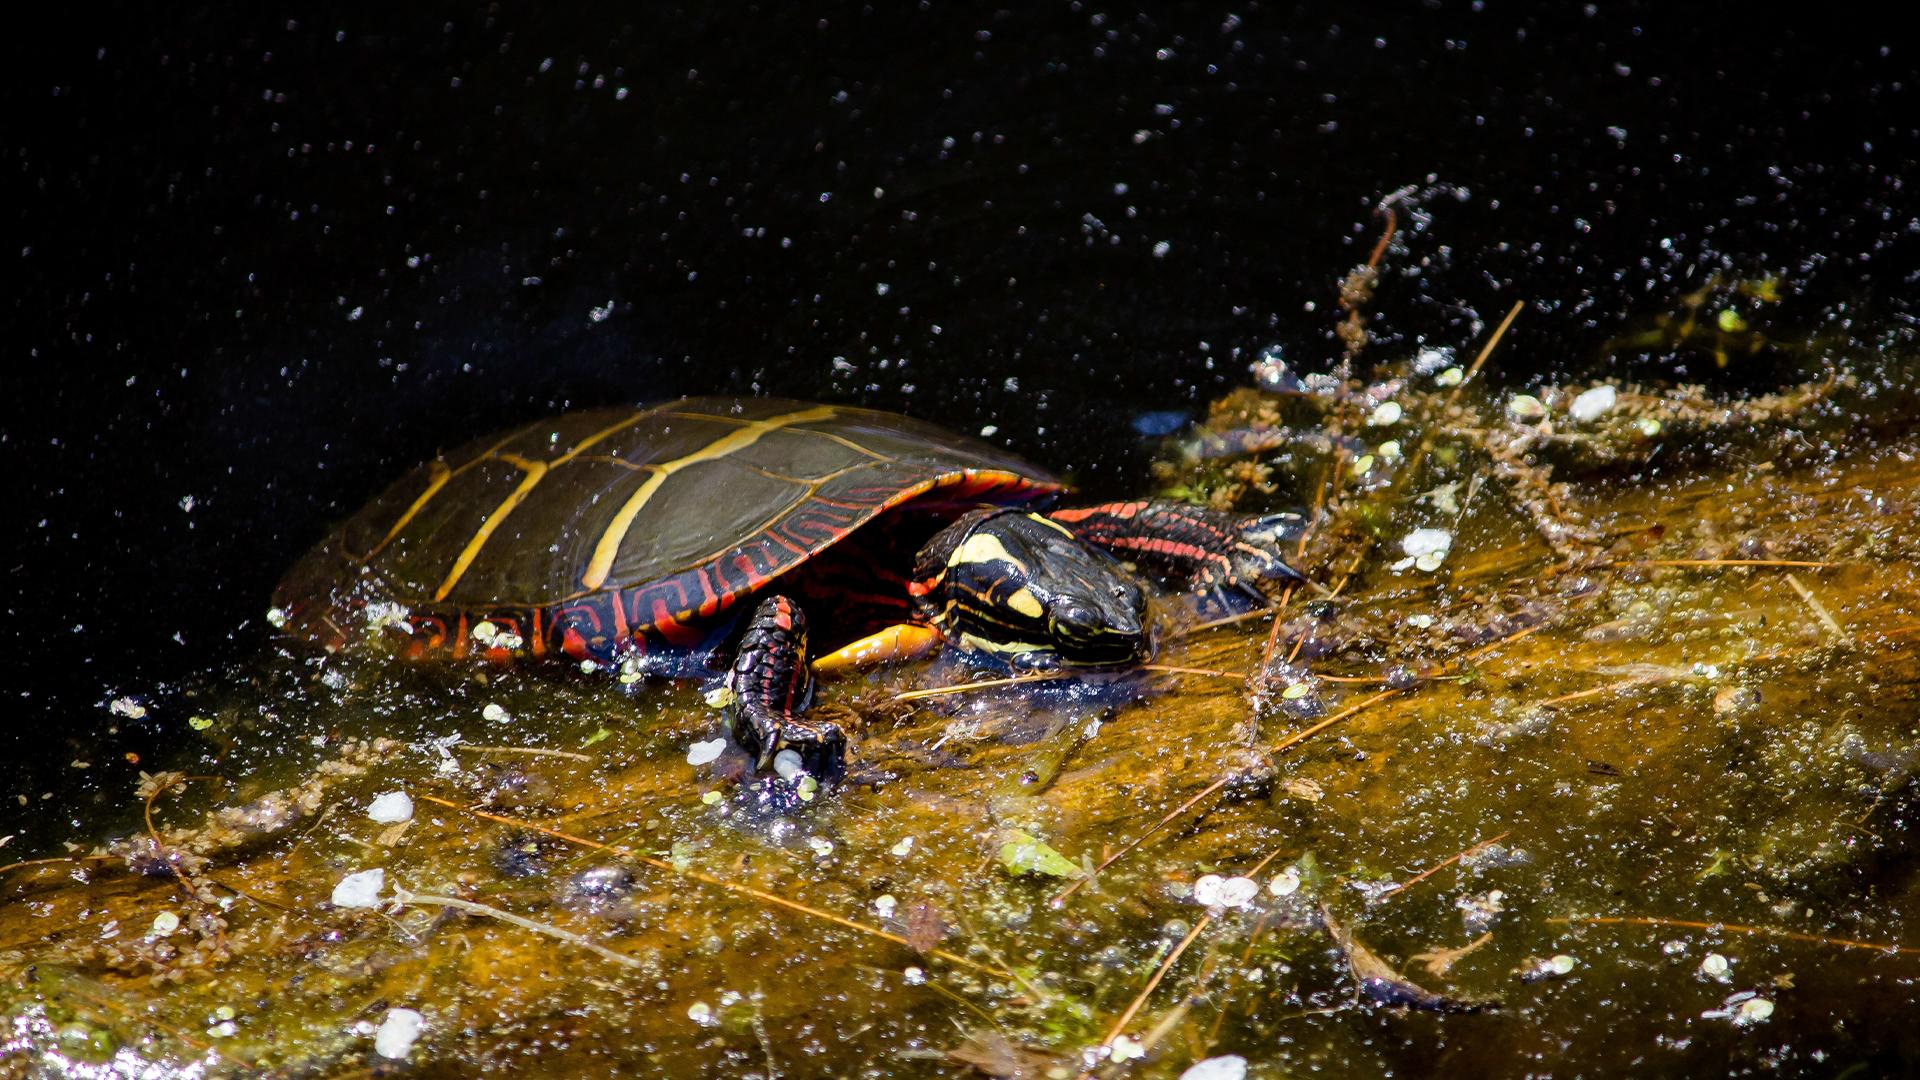 Where Do Turtles Go In The Winter? – 